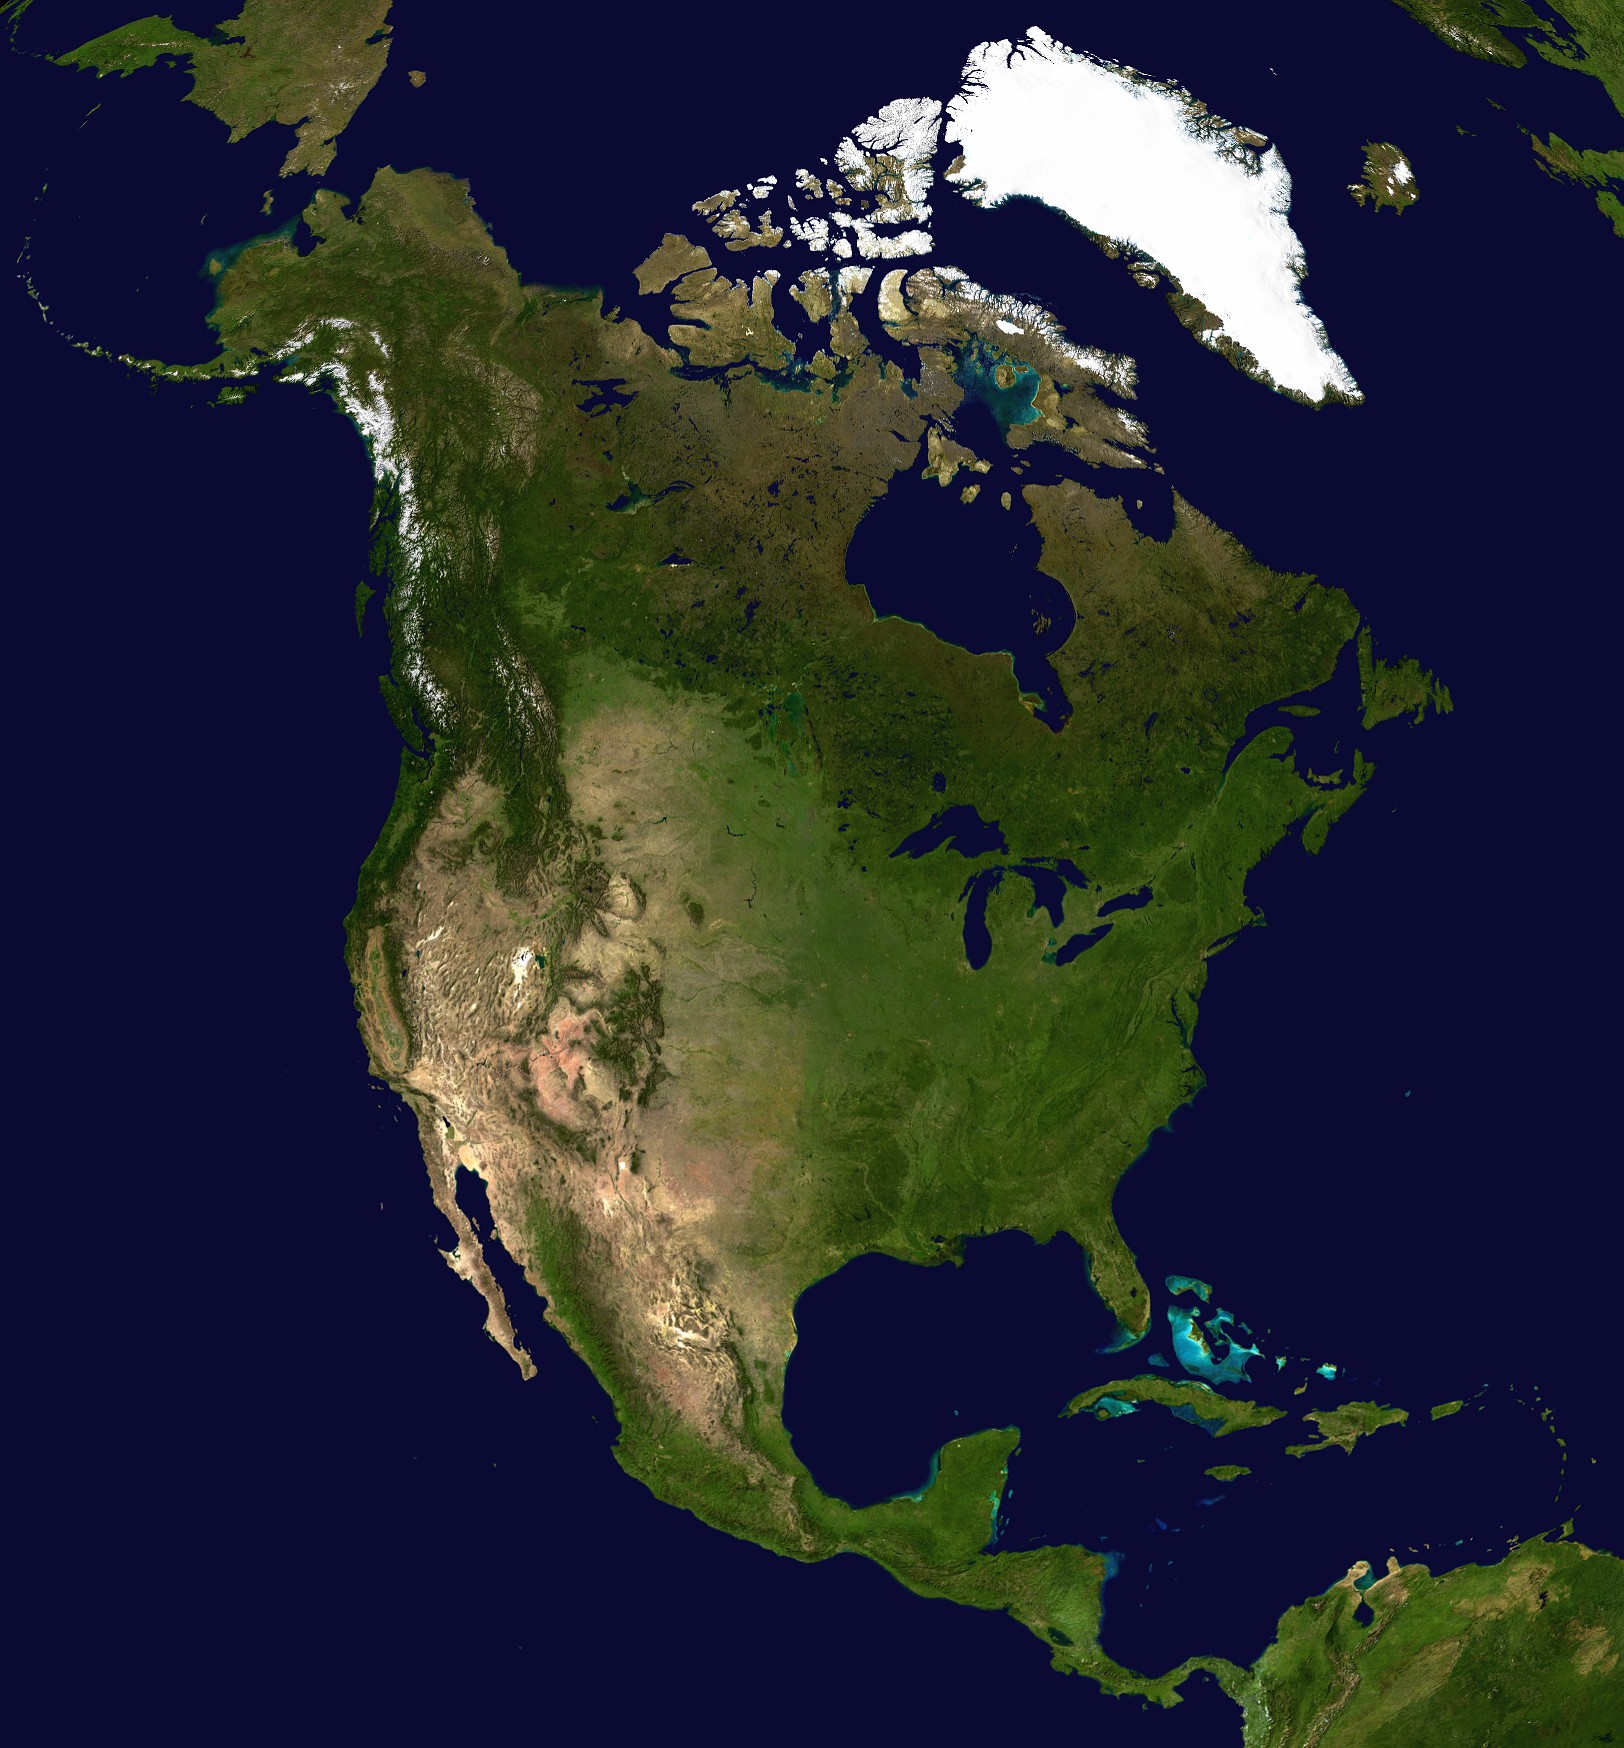 a satellite image showing the arctic region